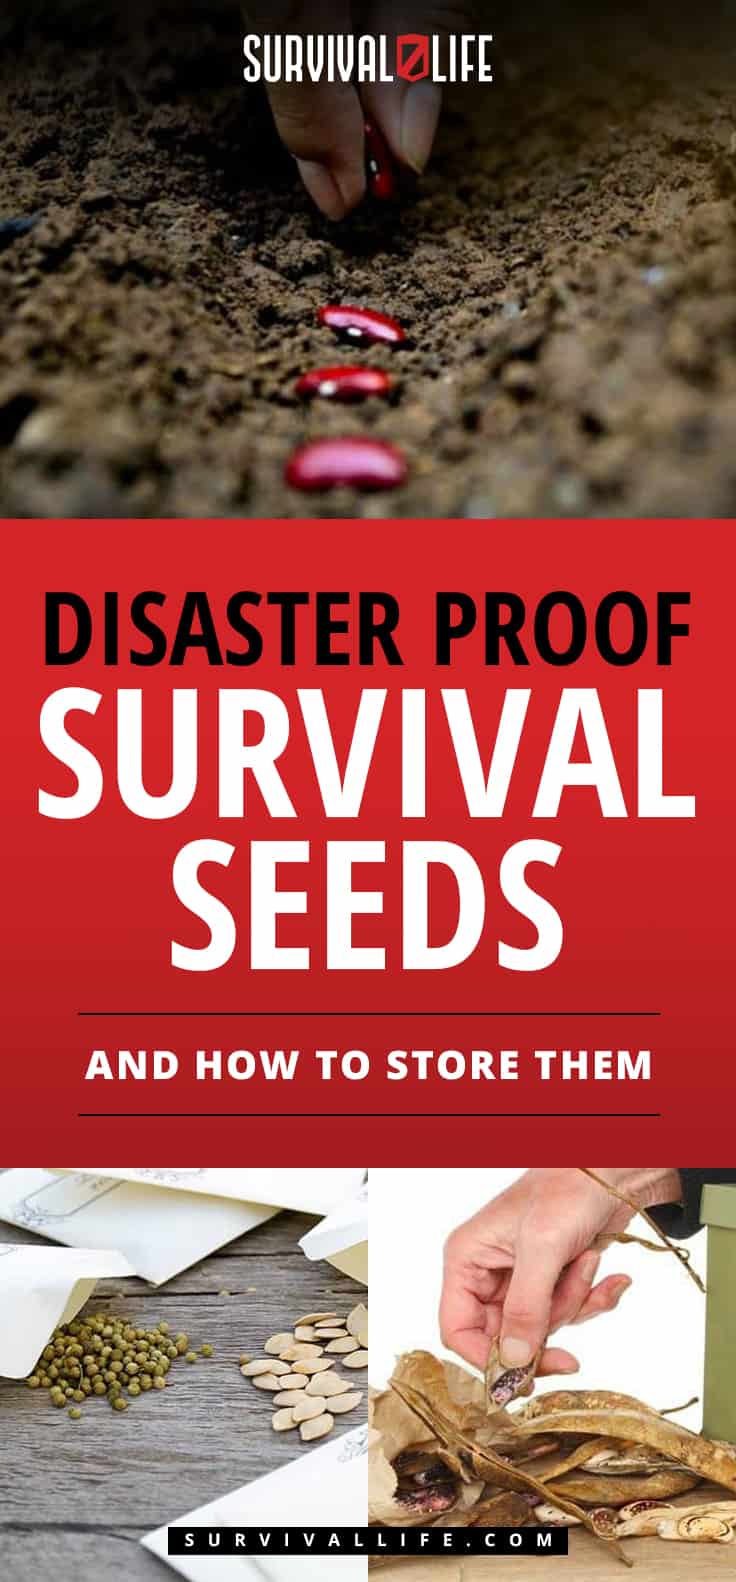 Survival Seeds | Disaster Proof Survival Seeds And How To Store Them